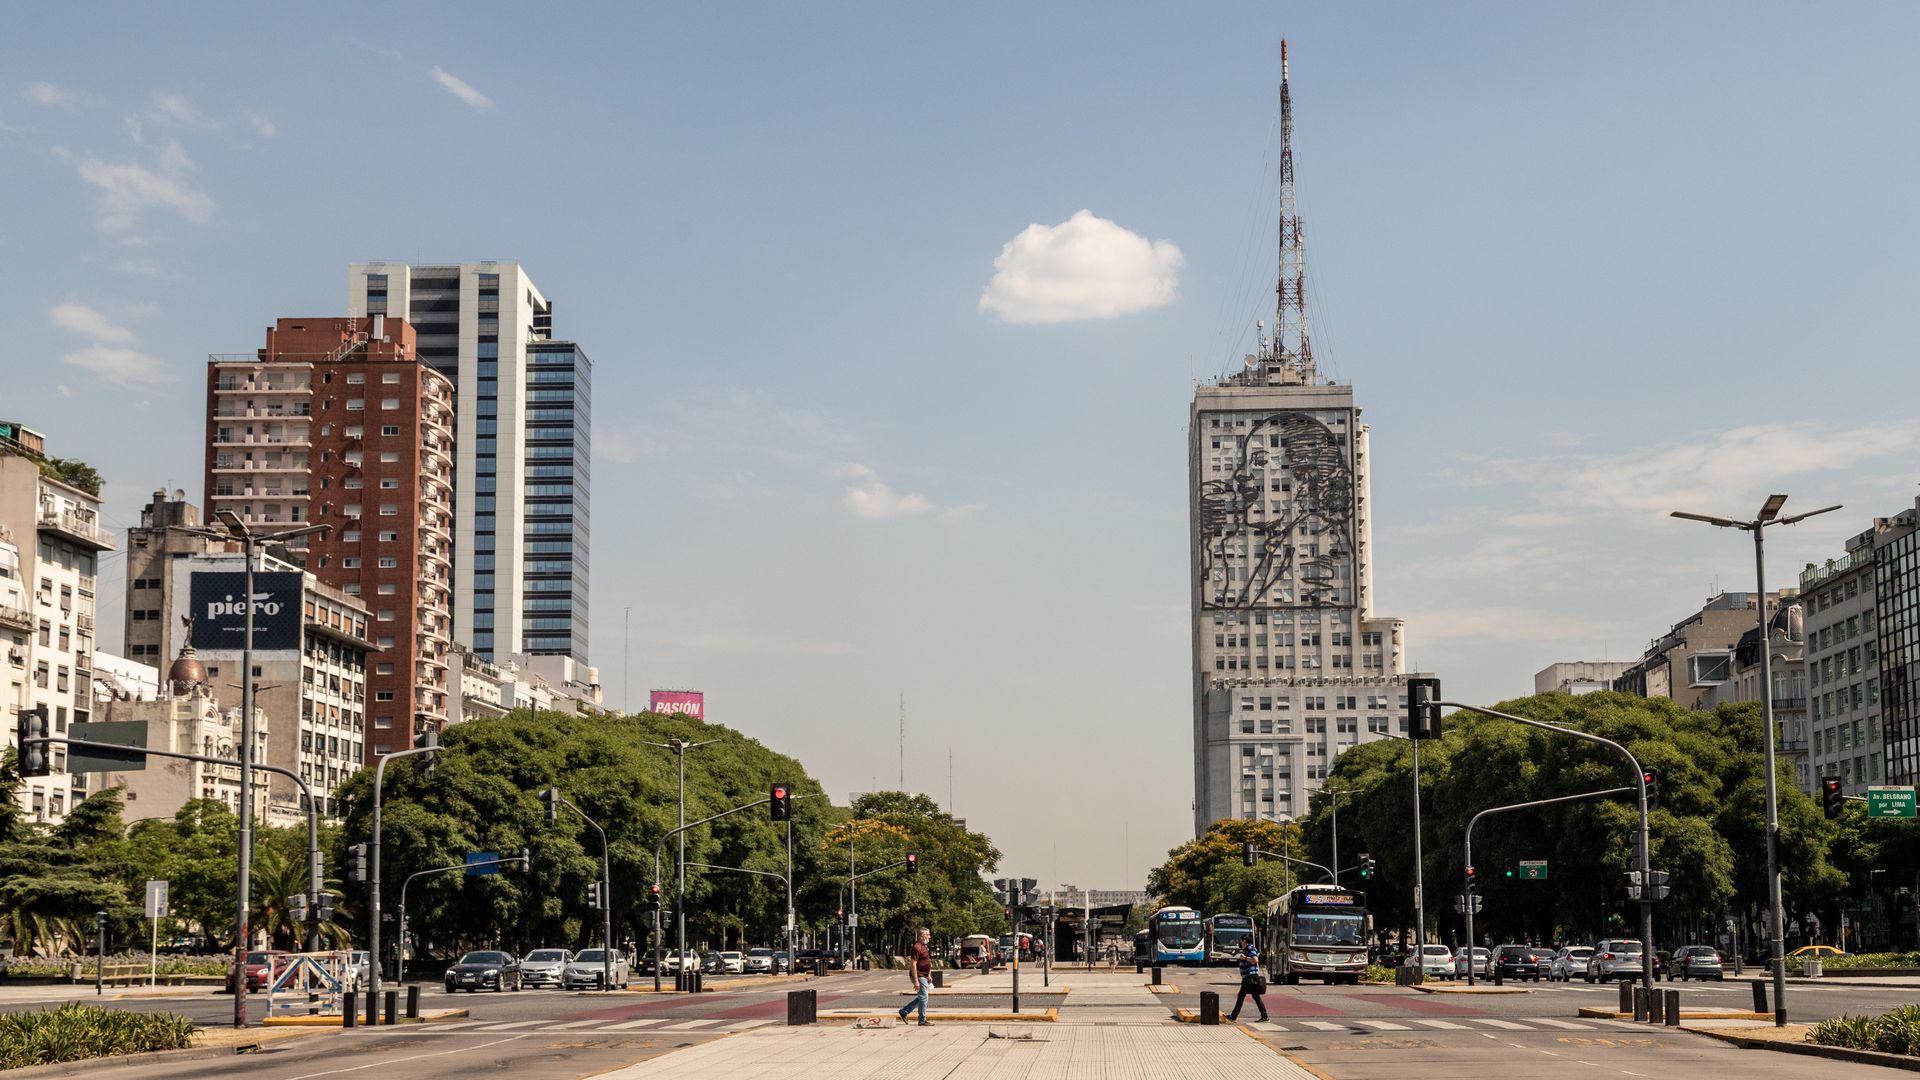 Buenos Aires at a standstill with record-high temperatures and power grid outages. Photo: Anita Pouchard Serra/Bloomberg via Getty Images